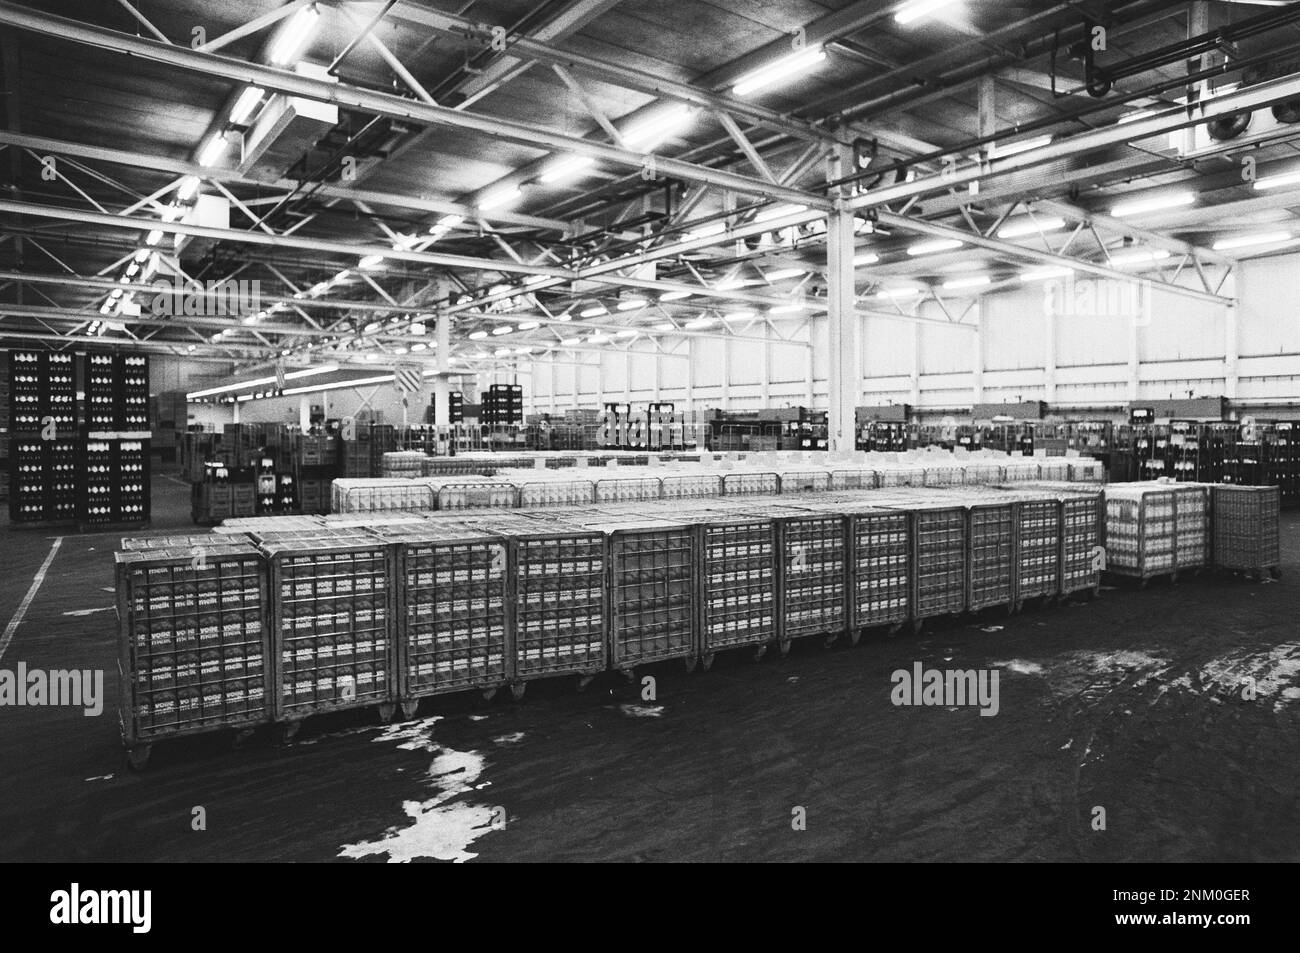 Milk drivers CMC Melkunie in Amsterdam on strike; large quantities of milk that is not transported ca. January 8, 1980 Stock Photo